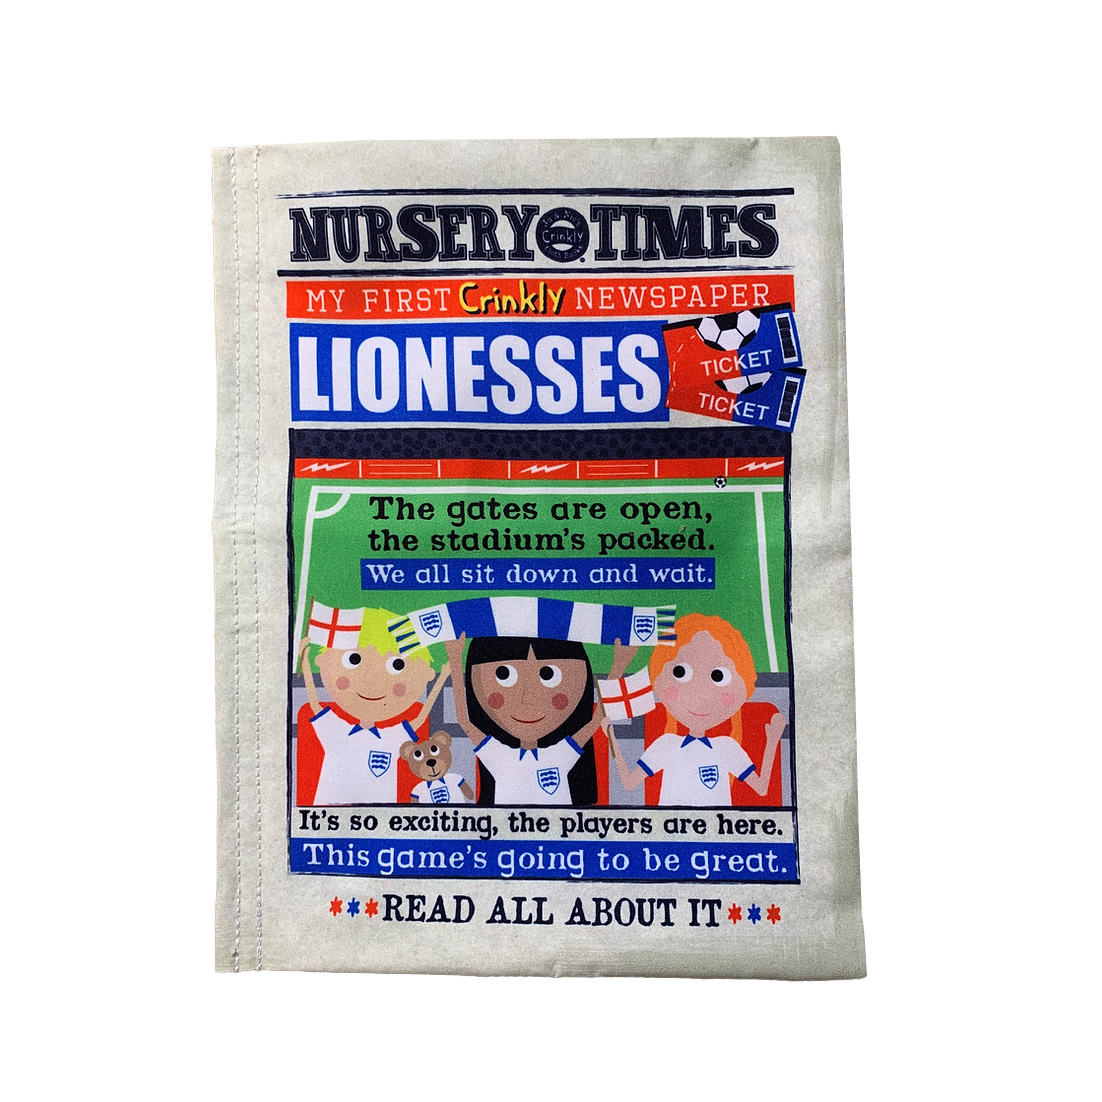 Jo & Nic Nursery Times Crinkly Book LIONESSES - football rhymes